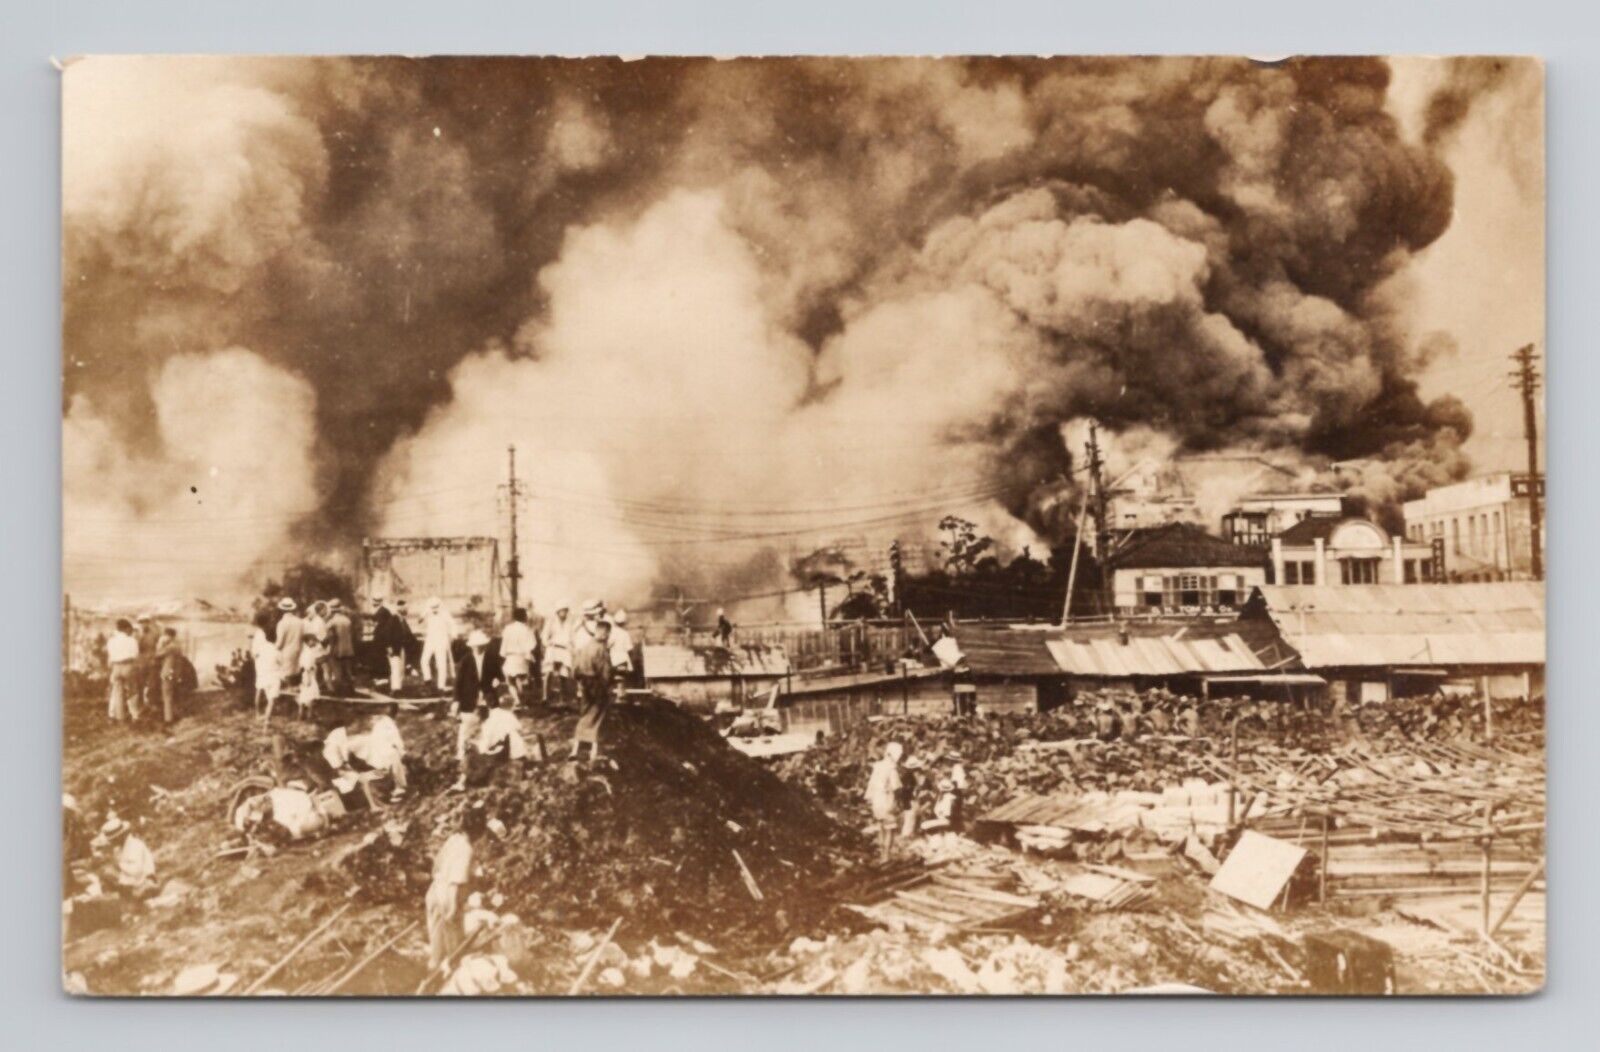 FIRE RPPC Earthquake? Disaster Antique Real Photo Postcard 40